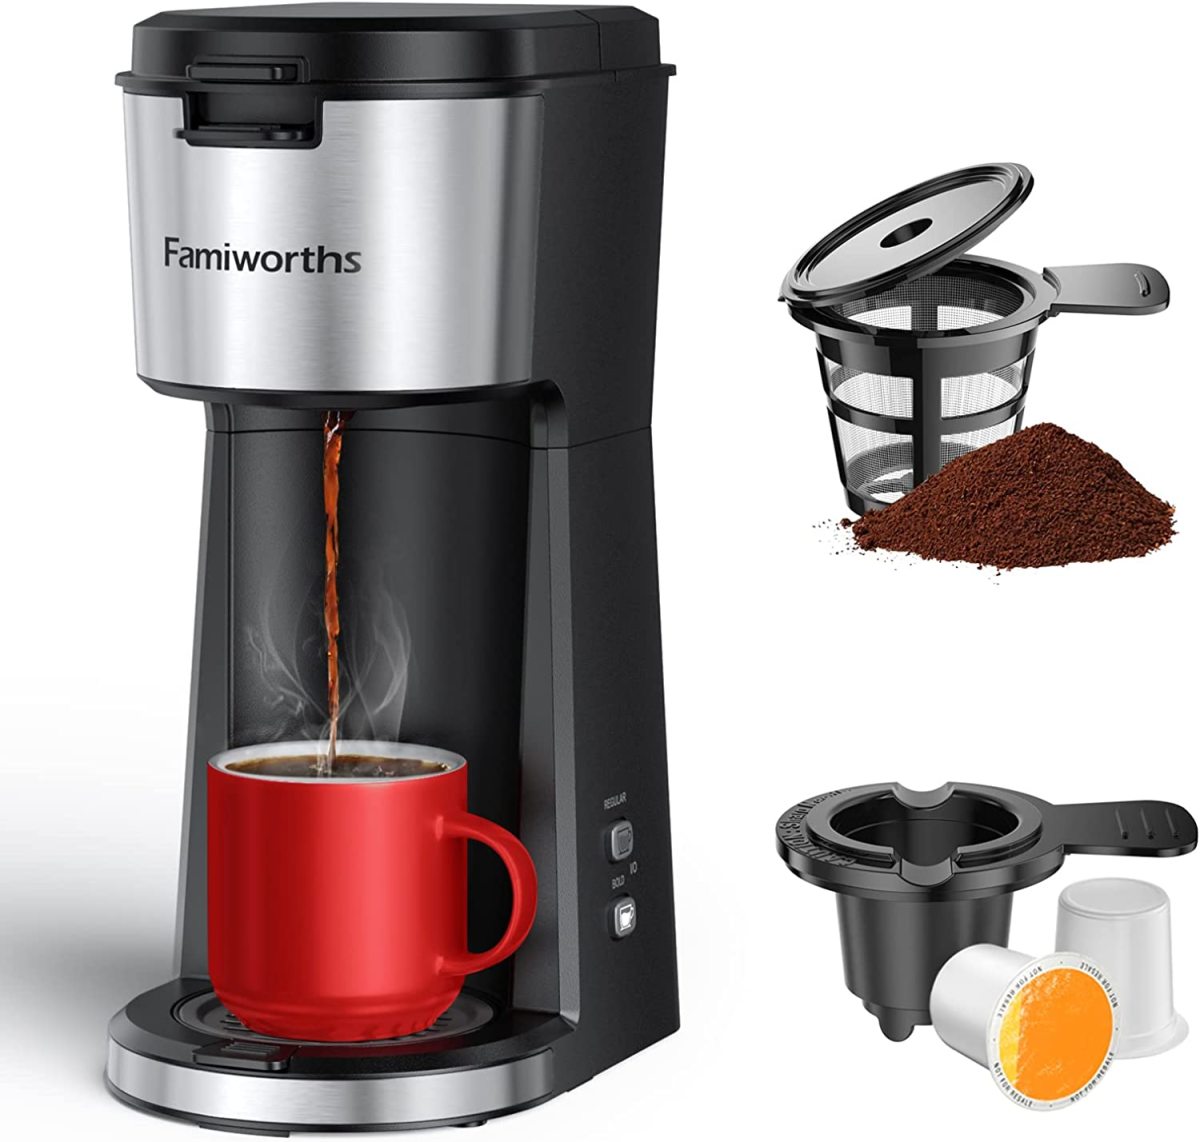 The Famiworths maker is designed for use with K Cup and ground coffee